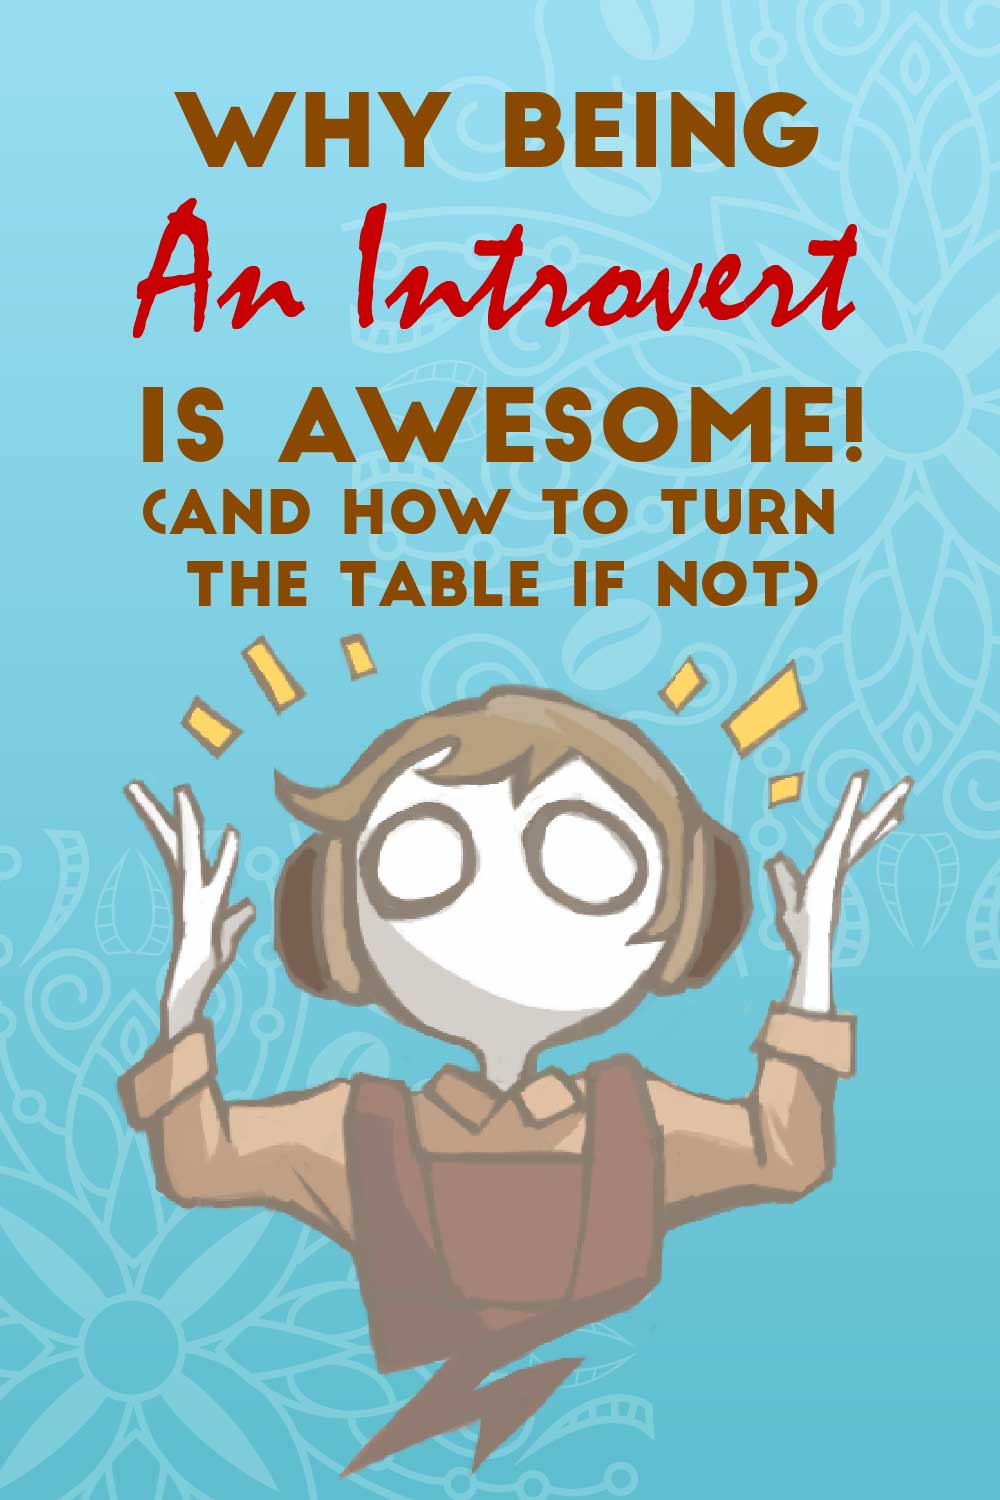 Why Being an Introvert is Awesome (and how to turn the table if not)